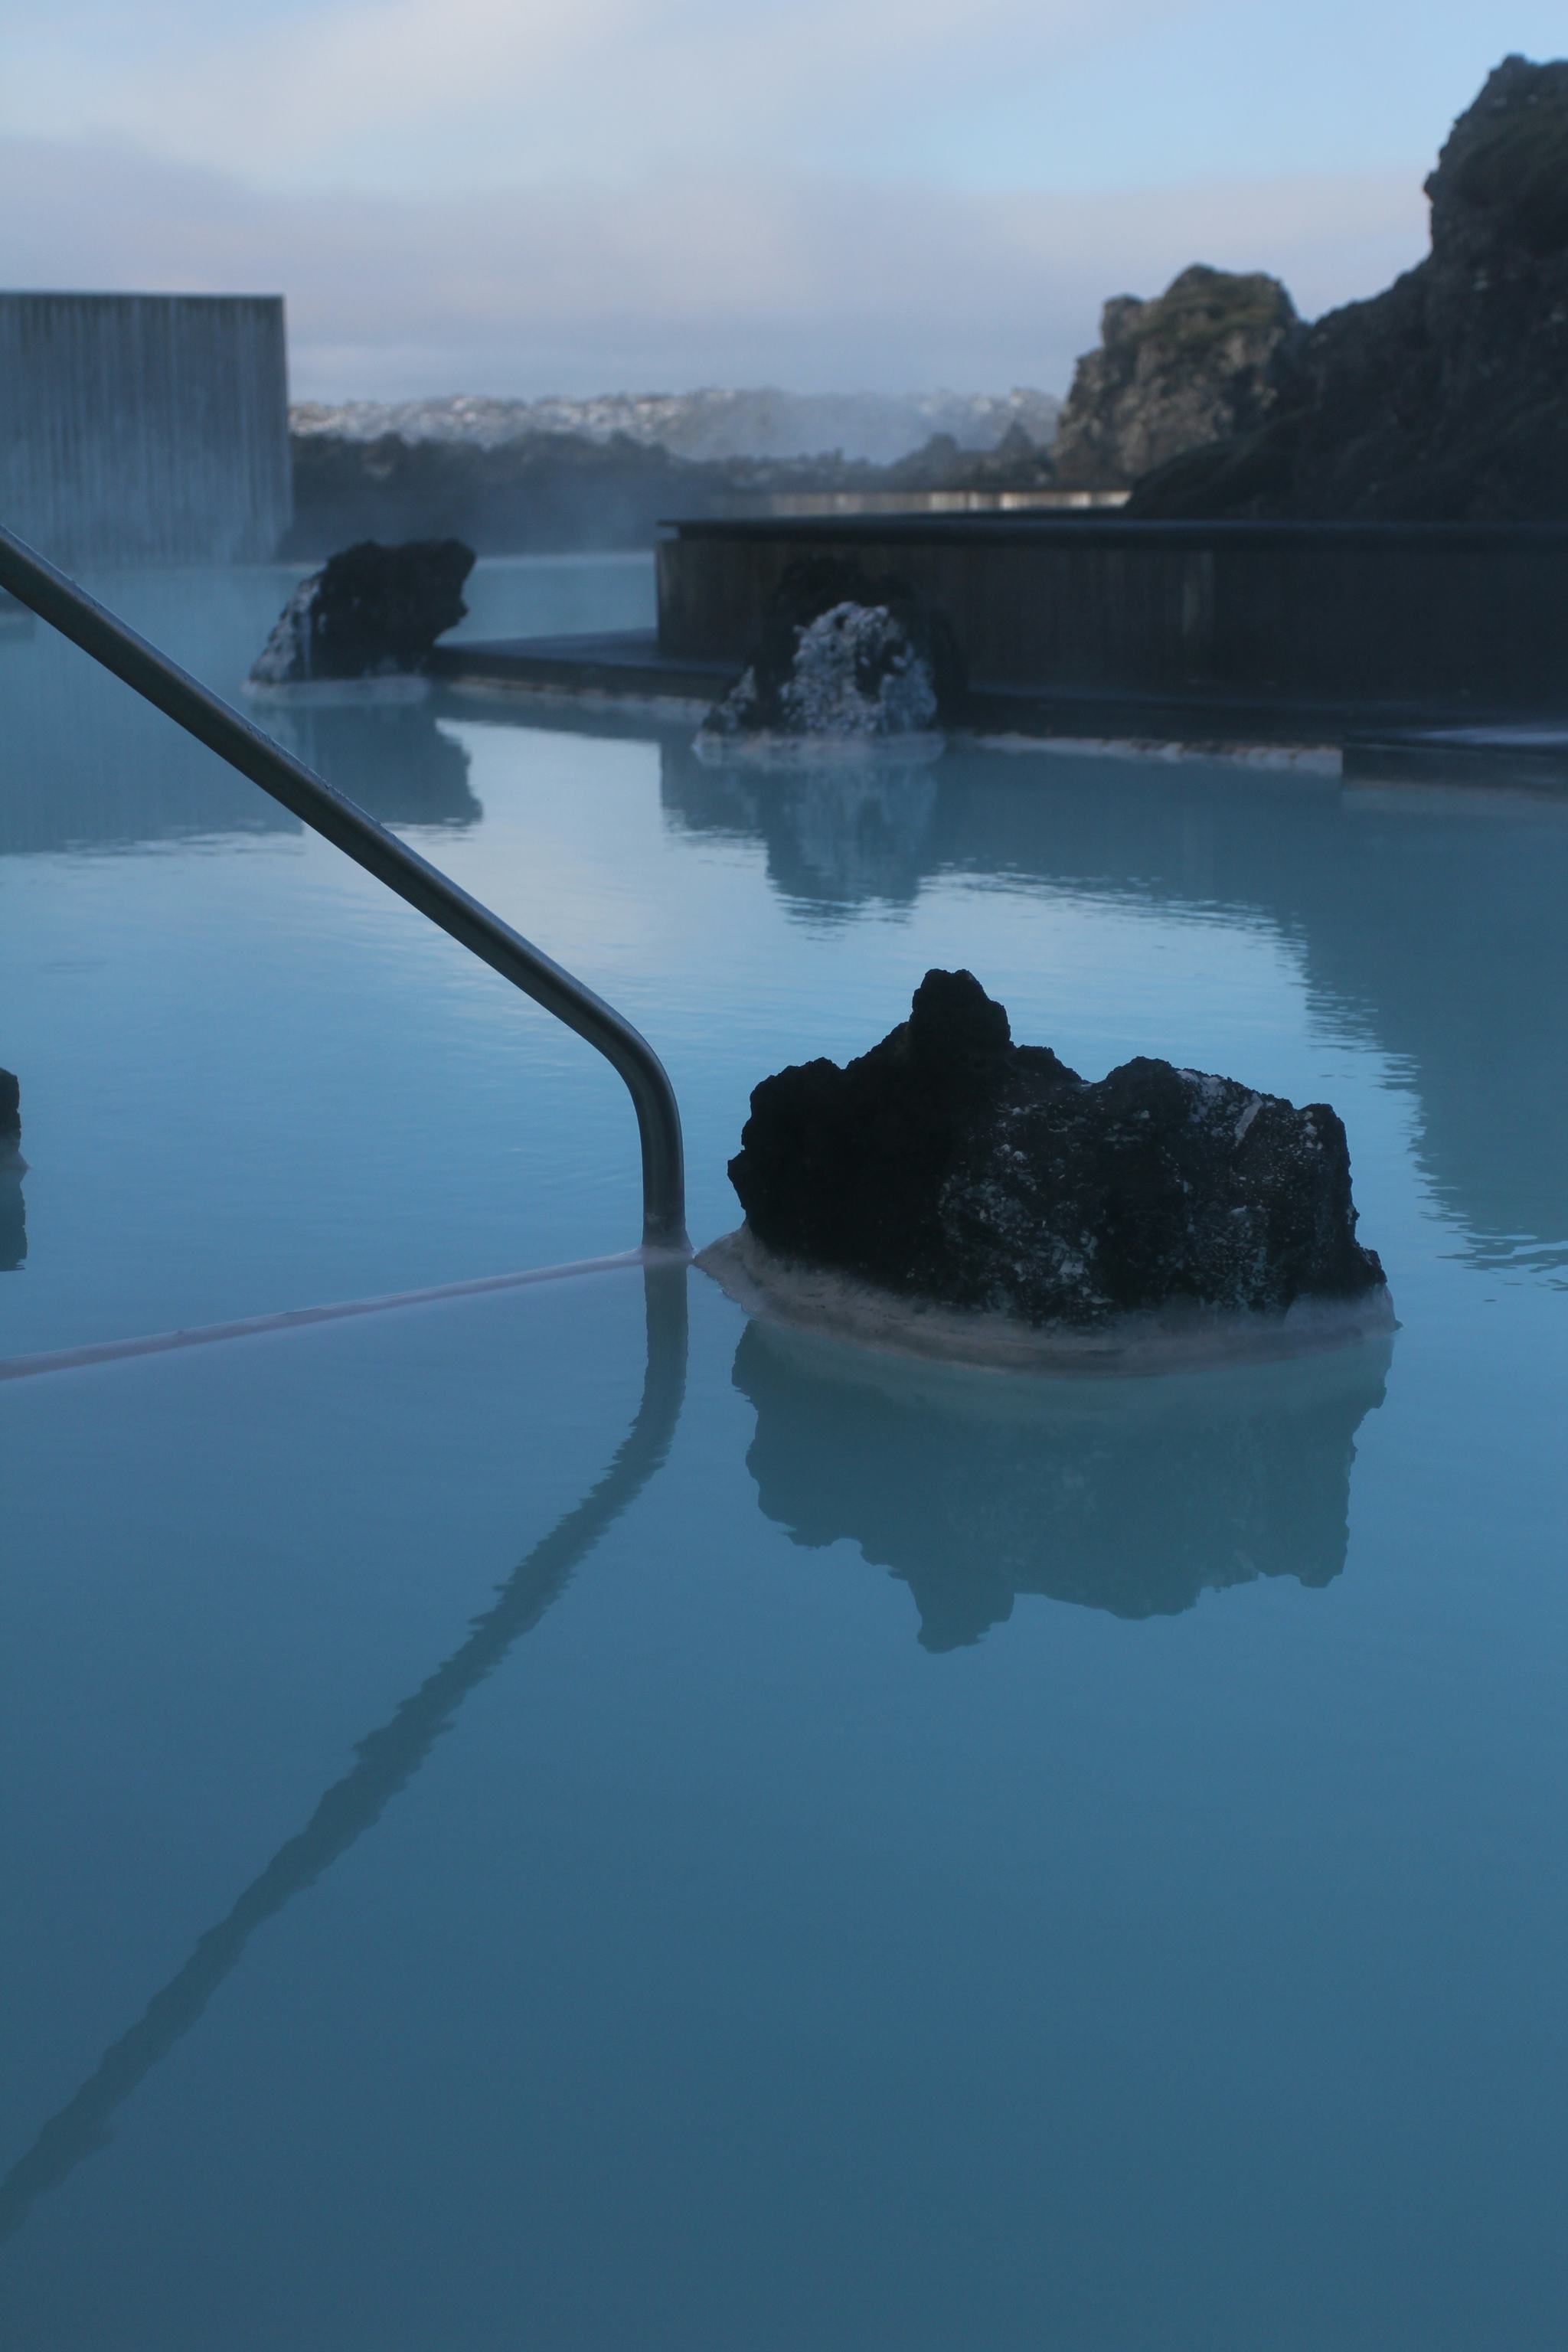 Blue lagoon, steam rises from it. Railing on the left side and lava lump in the middle above the lagoon